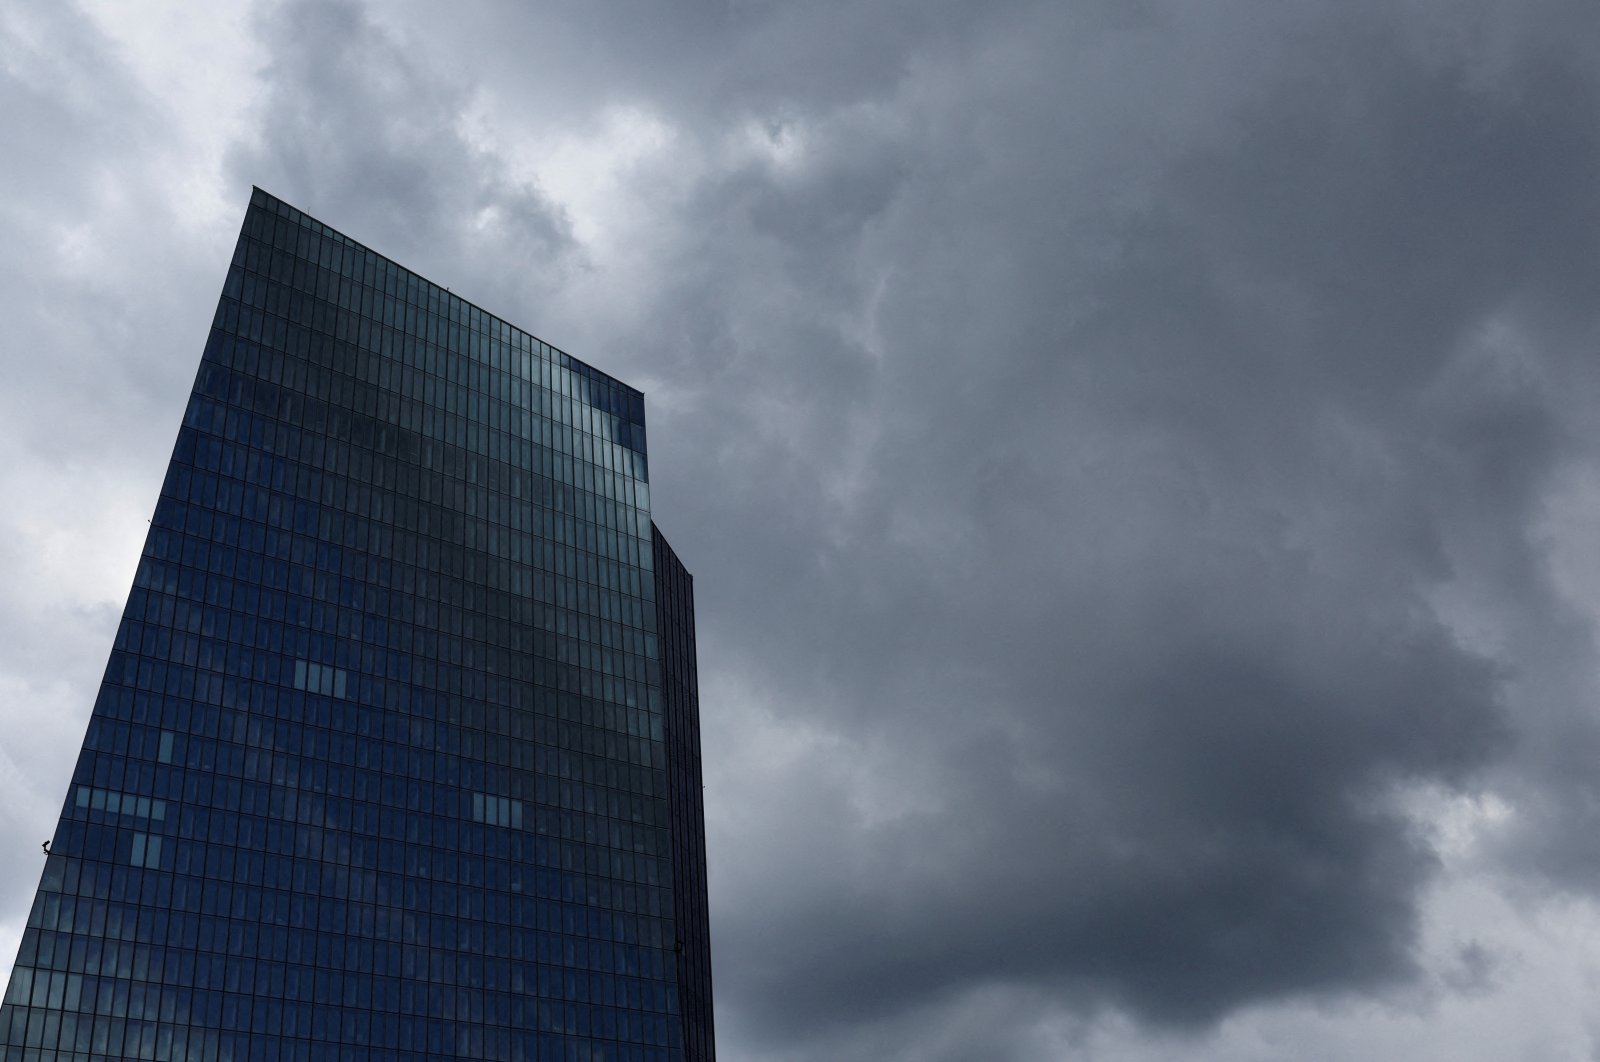 Rain clouds gather near the European Central Bank (ECB) building, in Frankfurt, Germany, July 21, 2022. (Reuters Photo)